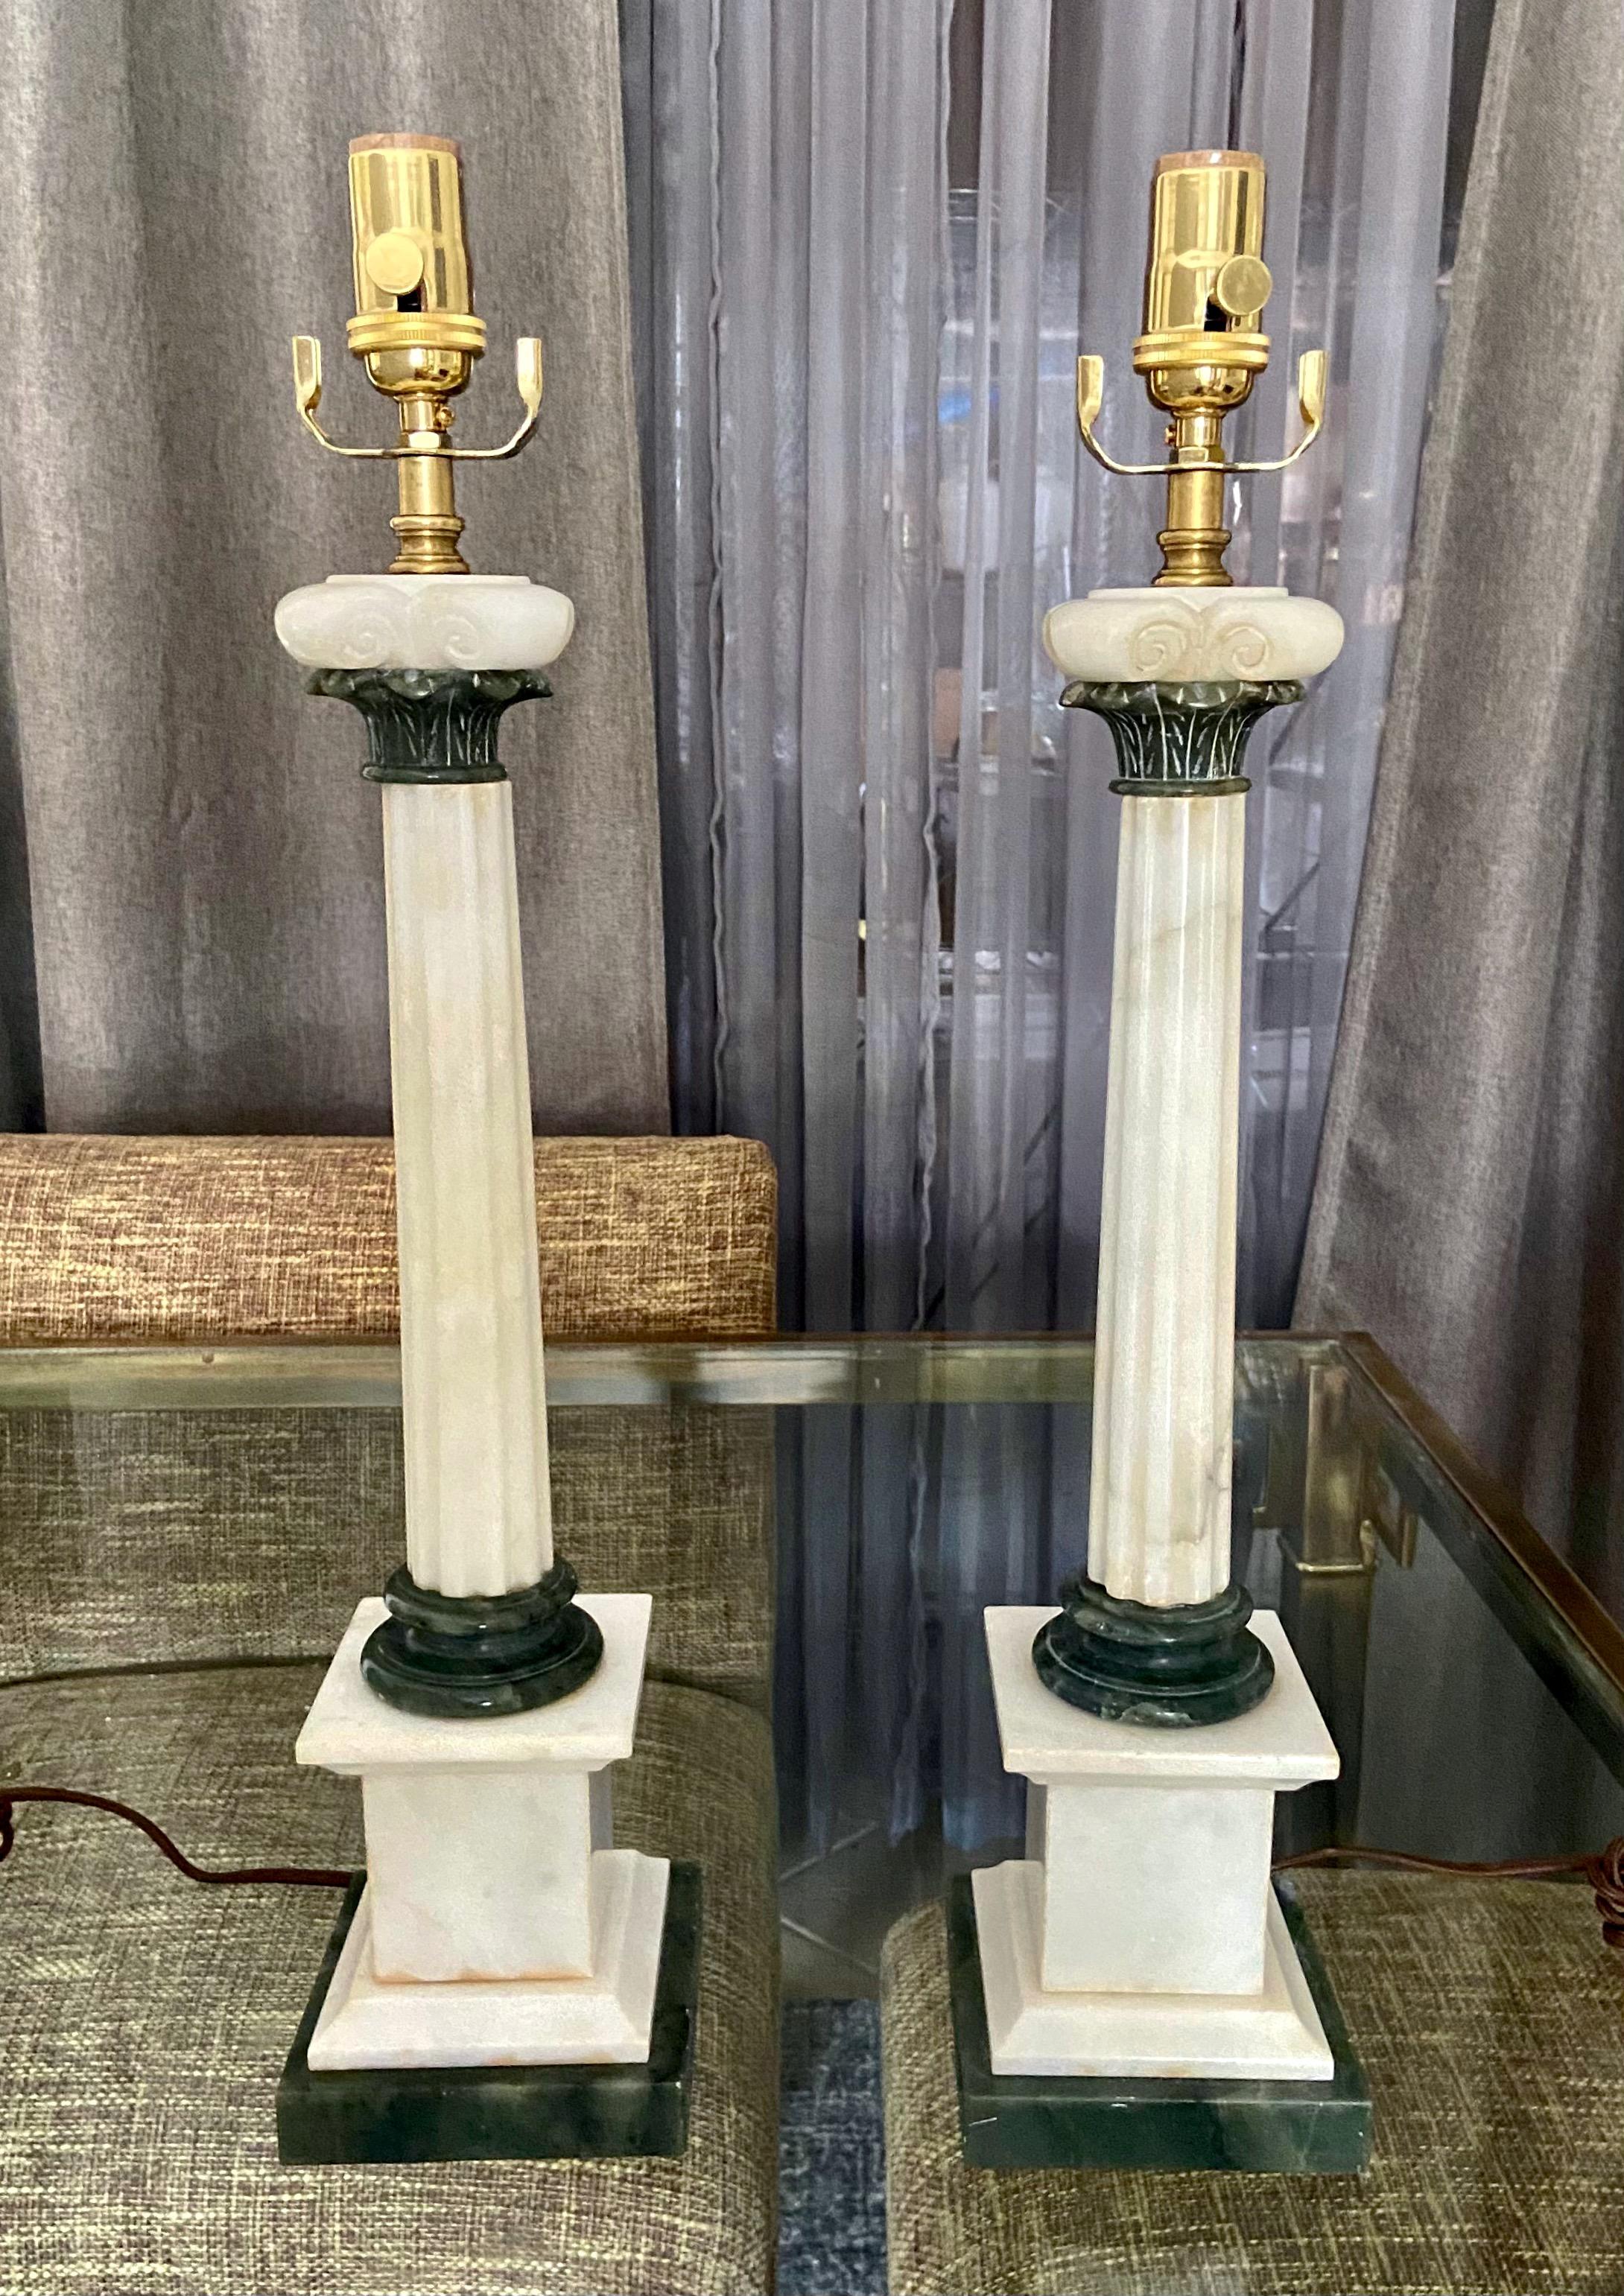 Pair of finely crafted hand carved neoclassical style column form alabaster lamps. Expertly crafted with combination white and green elements. Newly wired with new brass 3 way sockets and rayon cords. Shades are not included.
Measures: Height to